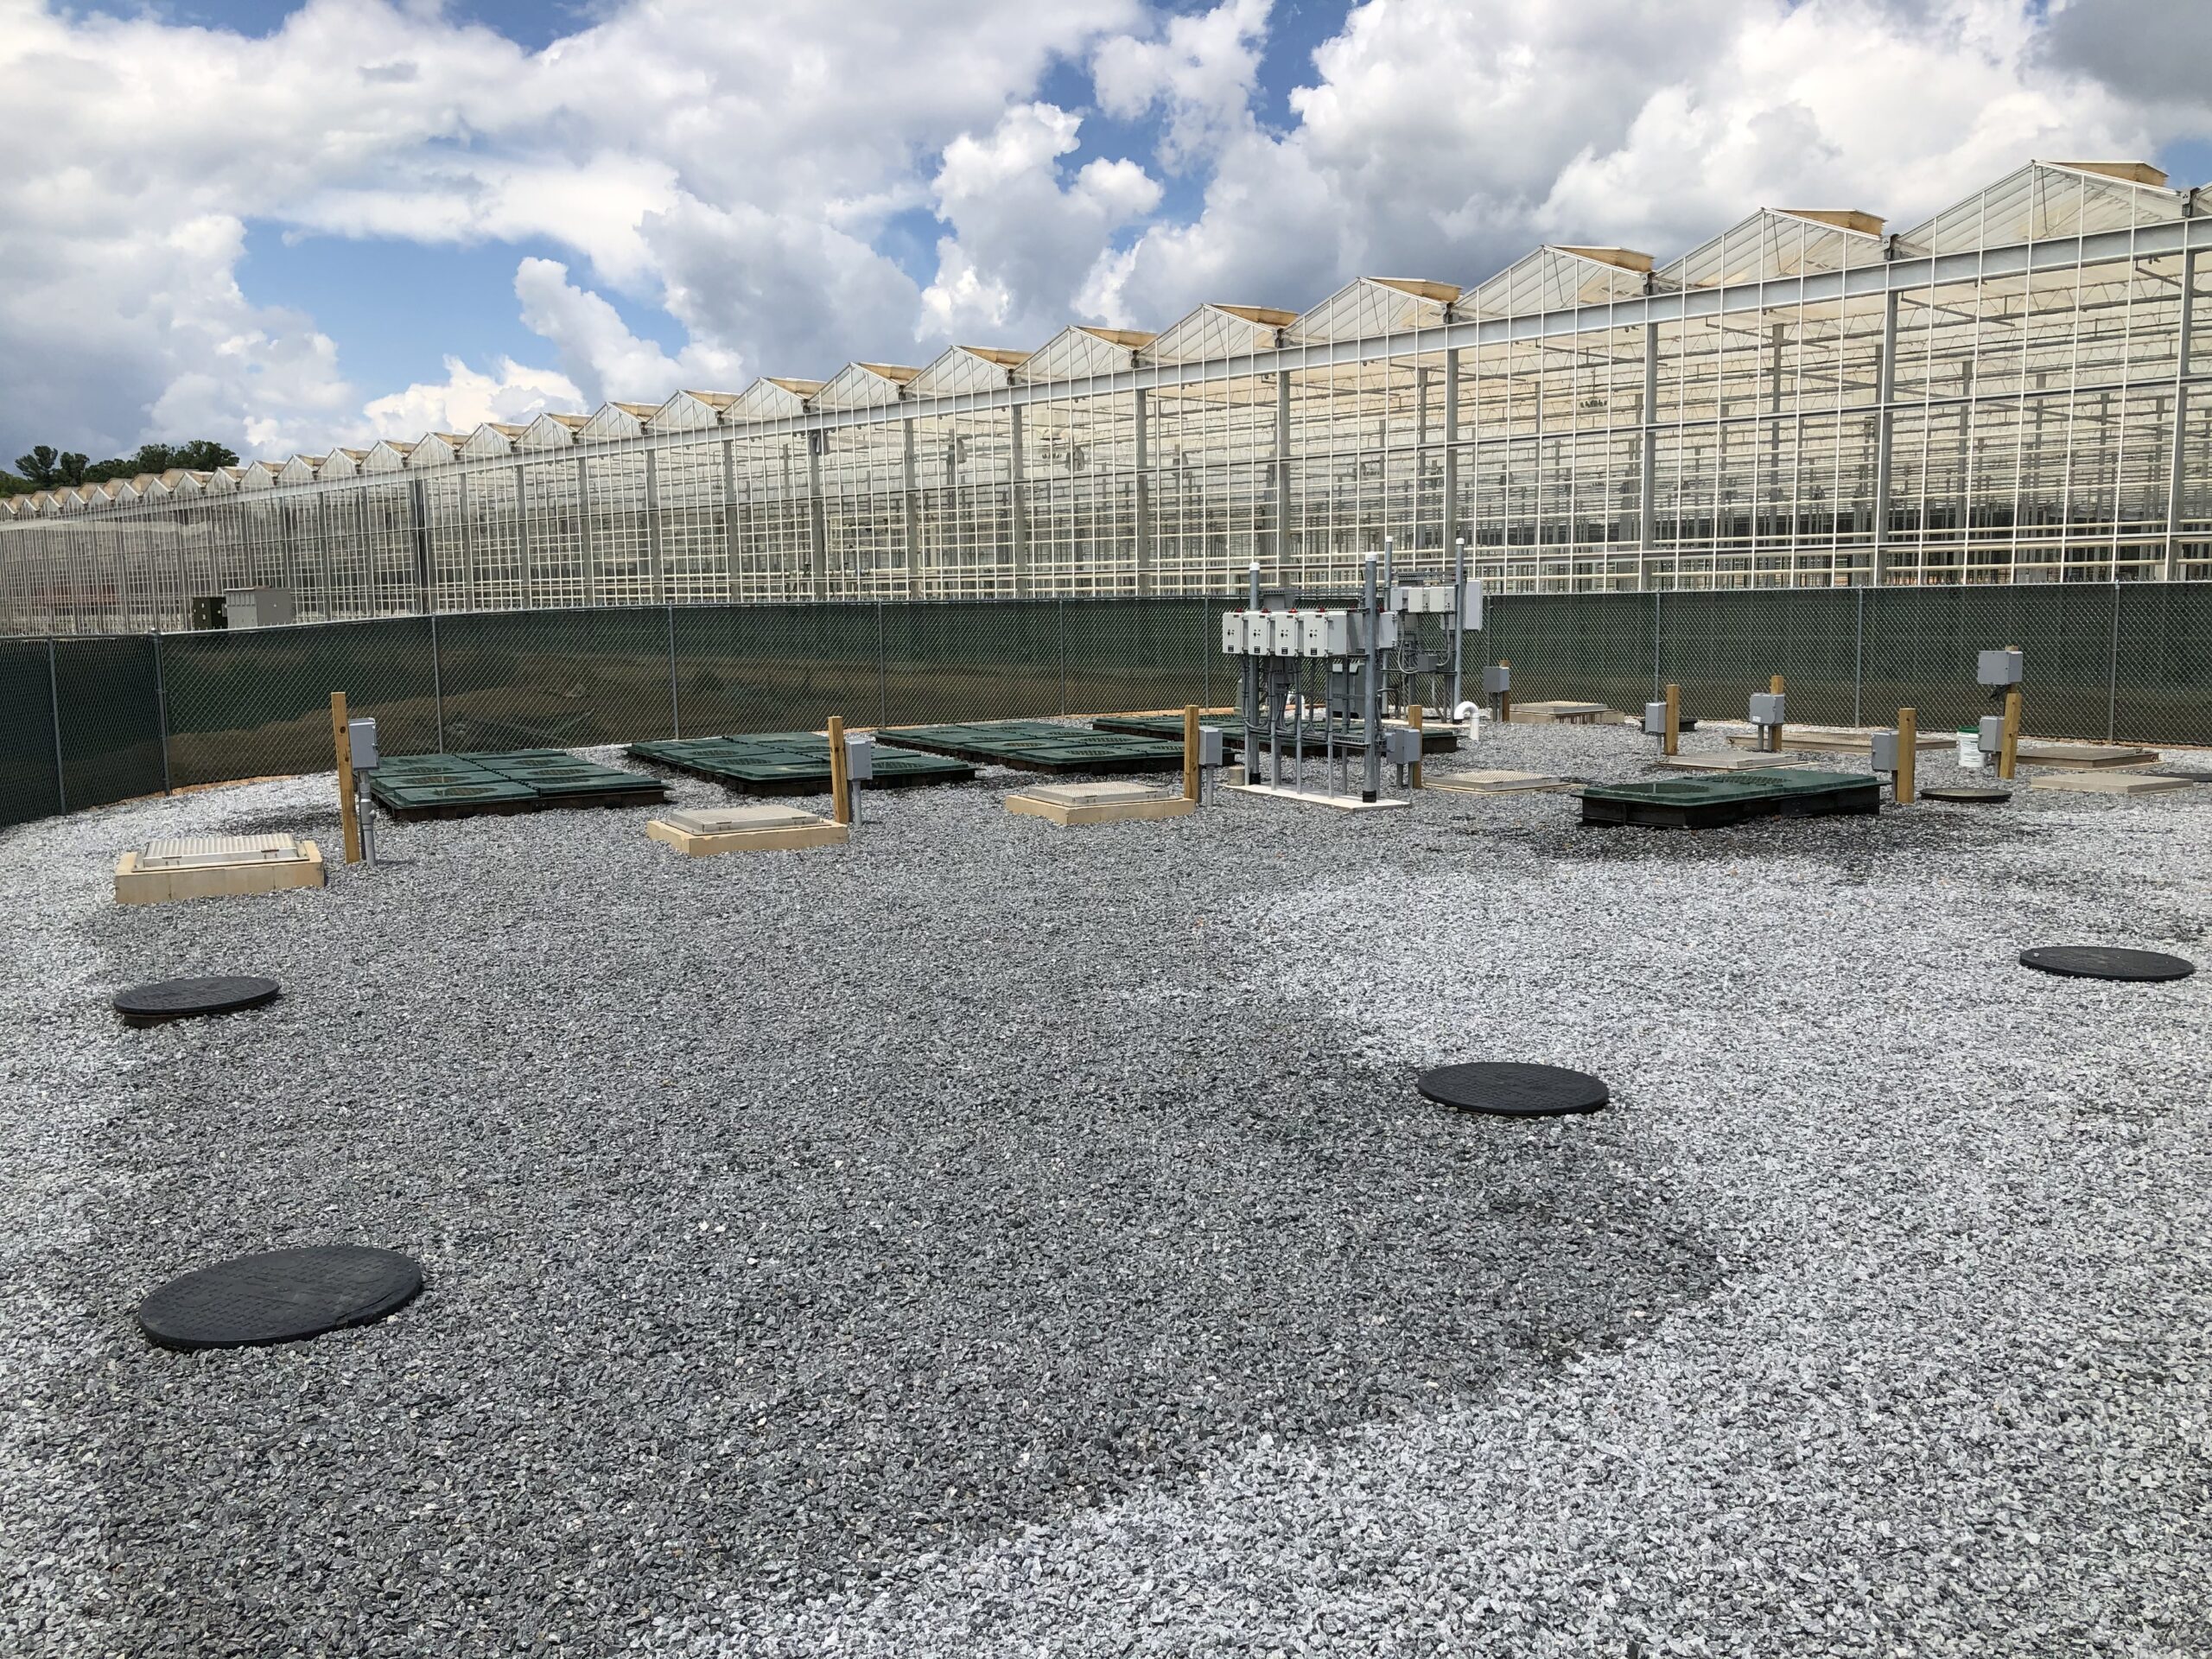 EZ Treat Provides 9000 gallons per day of Water Reuse in Hydroponic Horticulture Facility in North Carolina